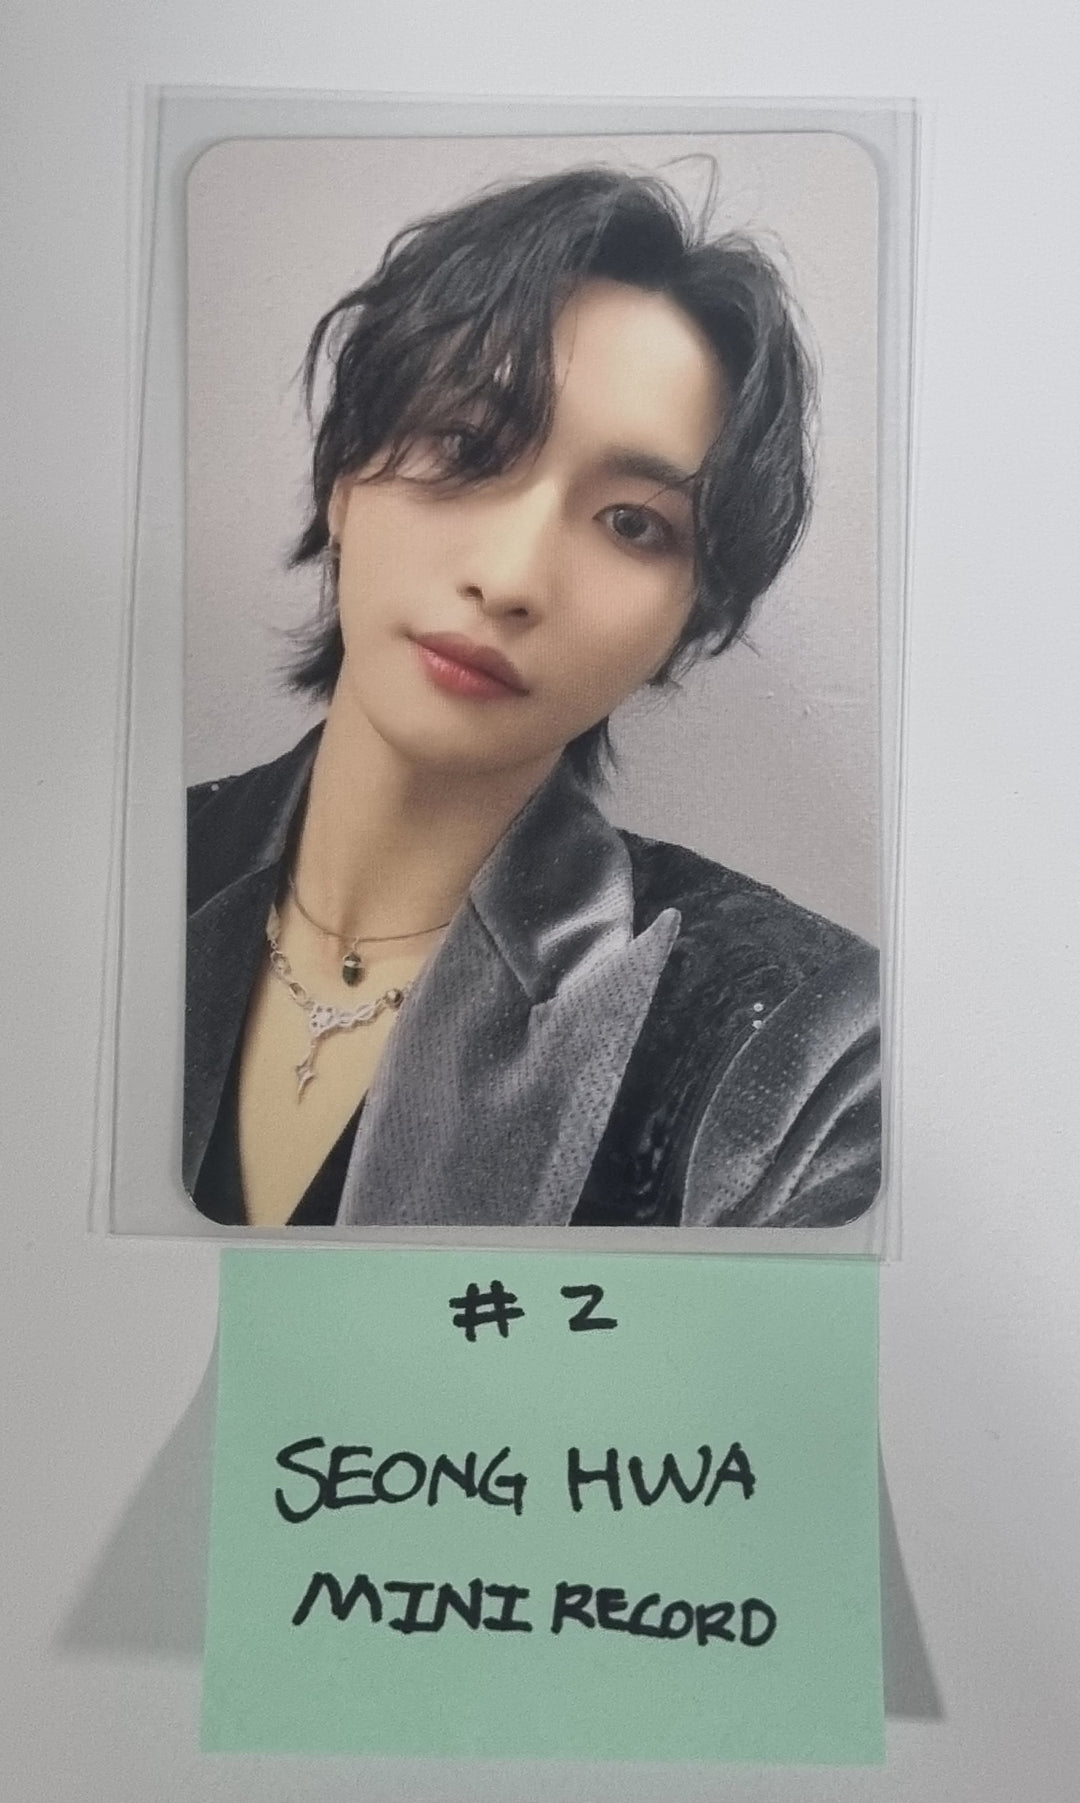 ATEEZ "THE WORLD EP.FIN : WILL" -  Minirecord Fansign Event Photocards [Platform Ver.] [23.12.18]